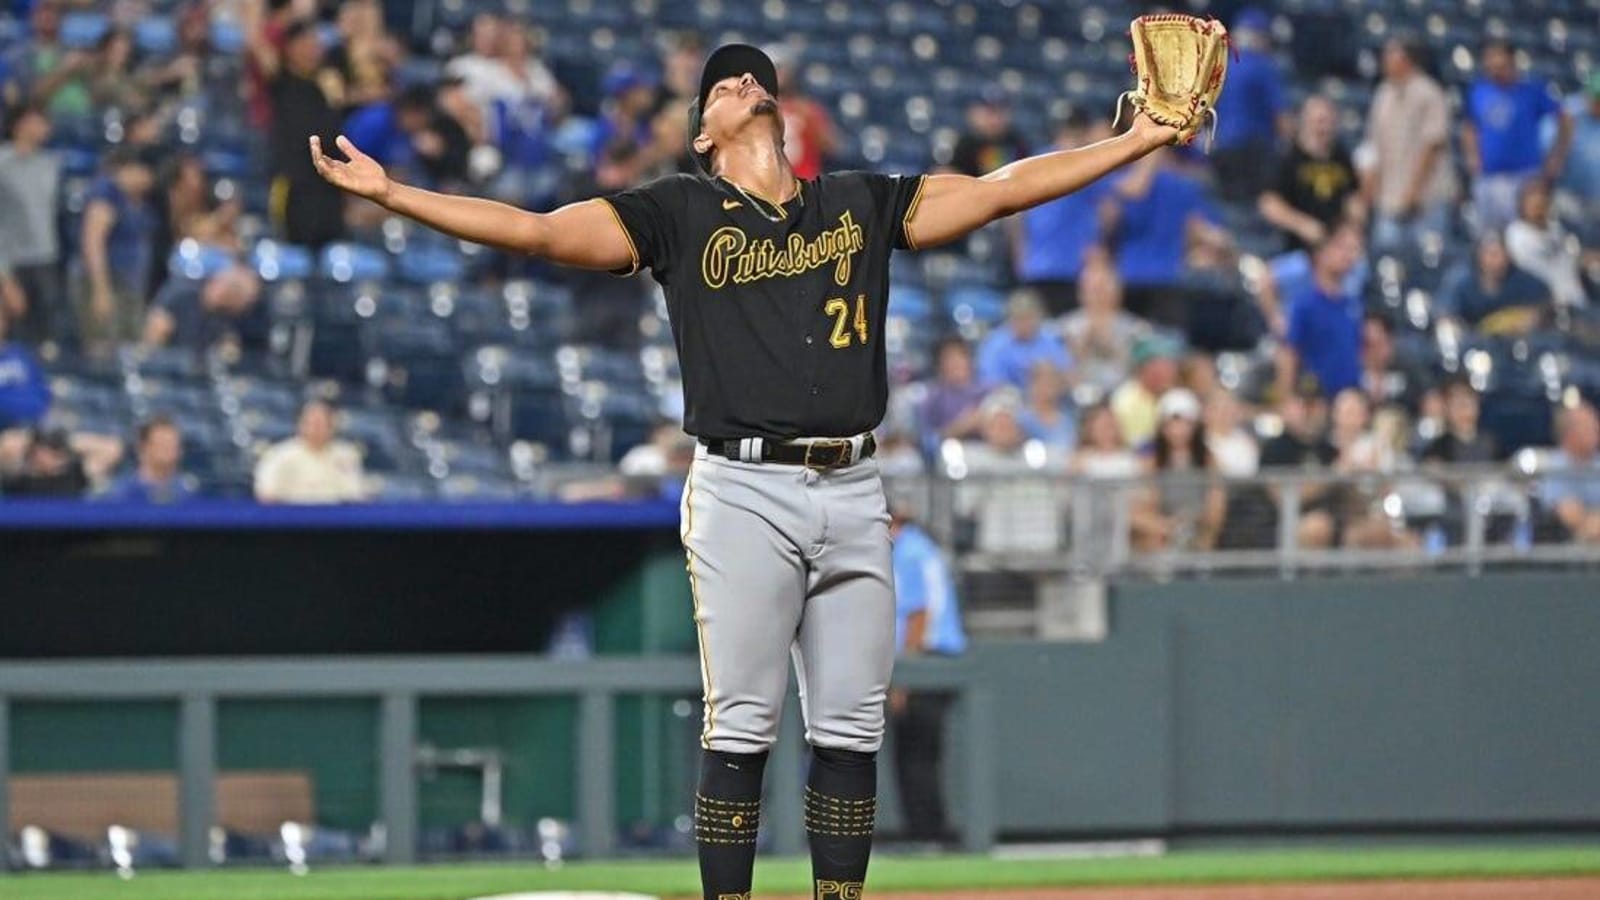 Pirates&#39; Johan Oviedo aims to follow up gem in clash vs. Cards